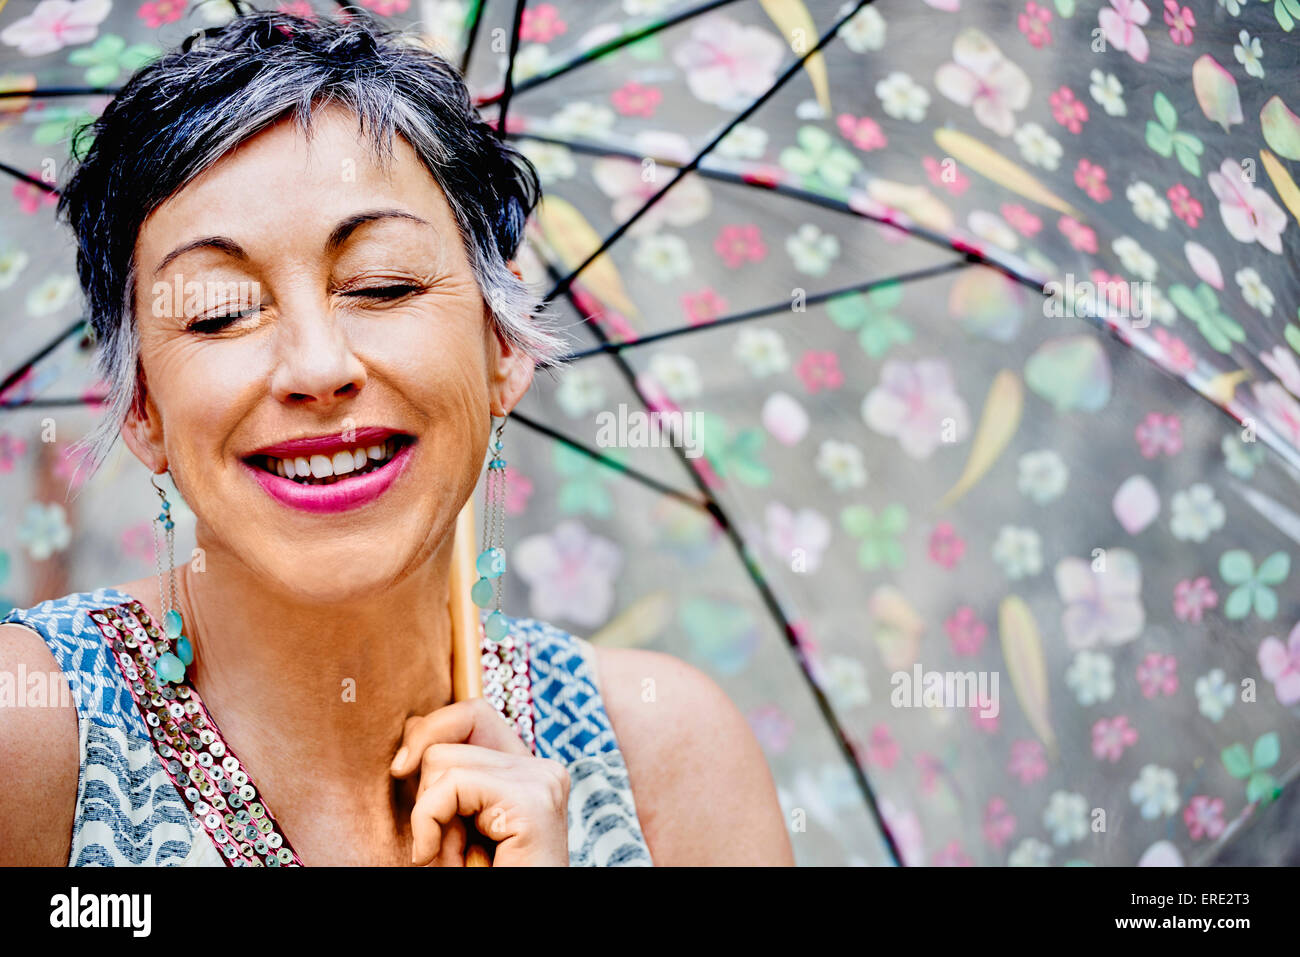 Older Caucasian woman with eyes closed holding umbrella Stock Photo